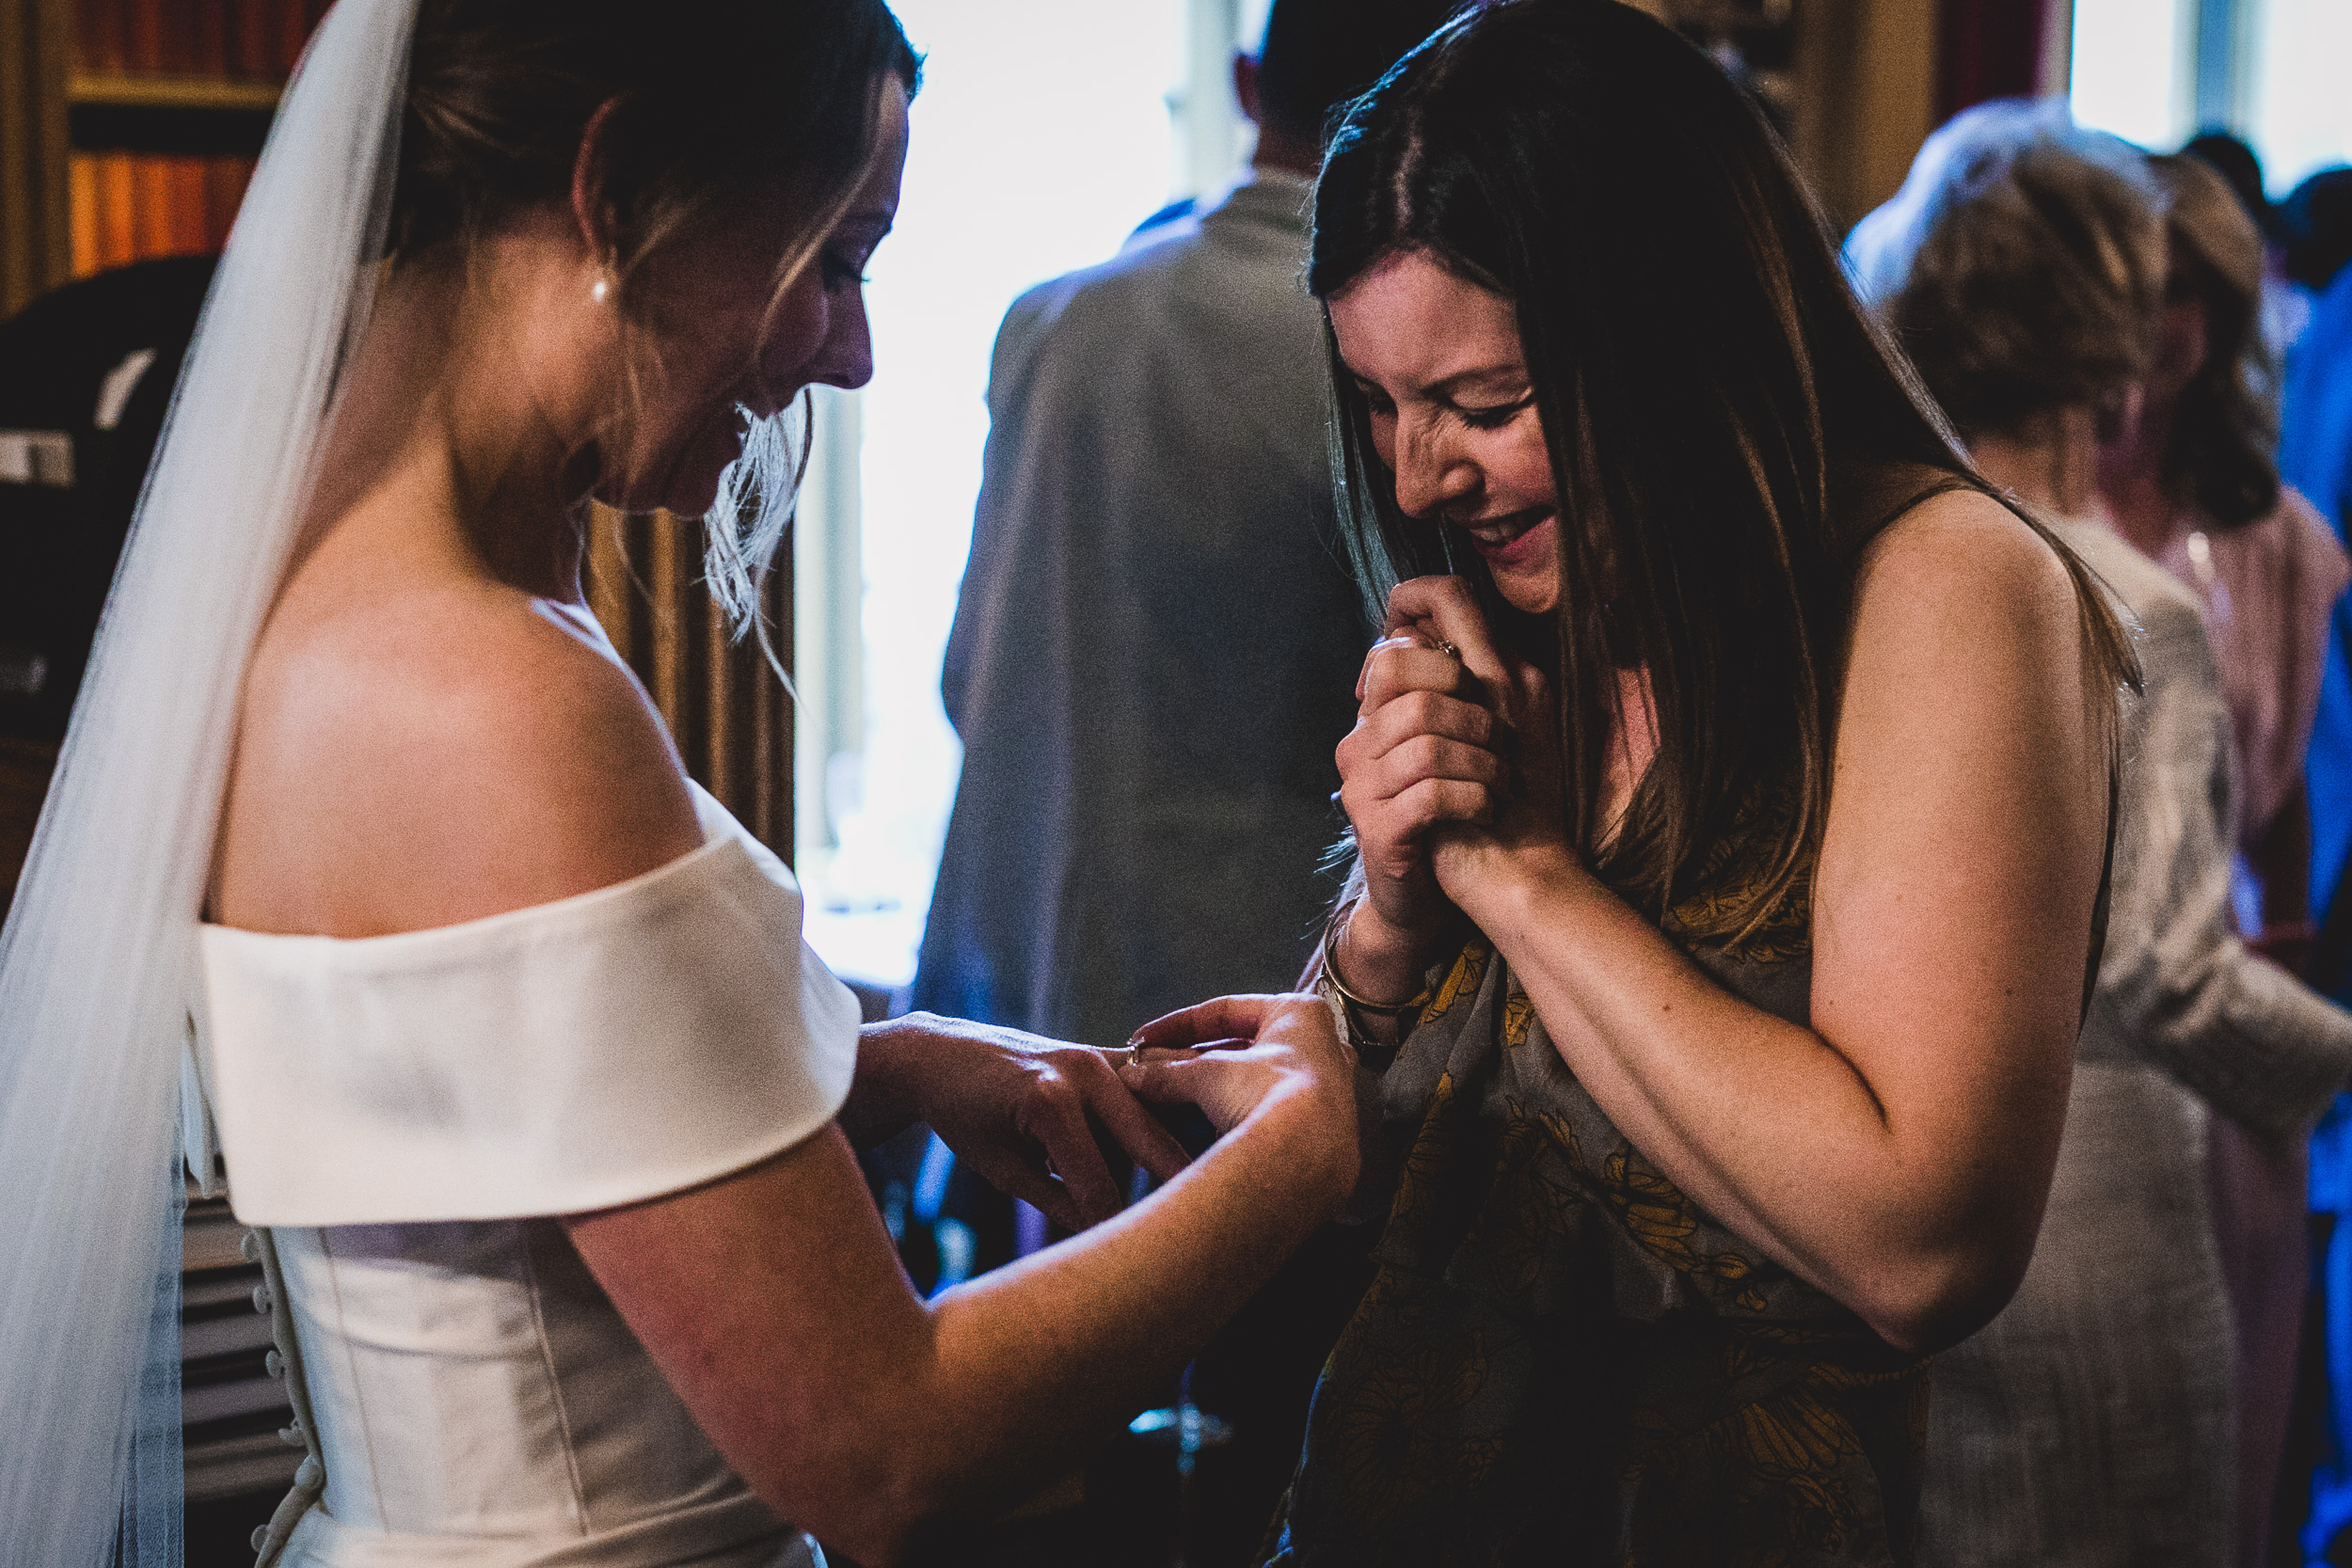 A wedding photographer captures the moment a woman helps another woman put on her wedding ring, alongside the groom.